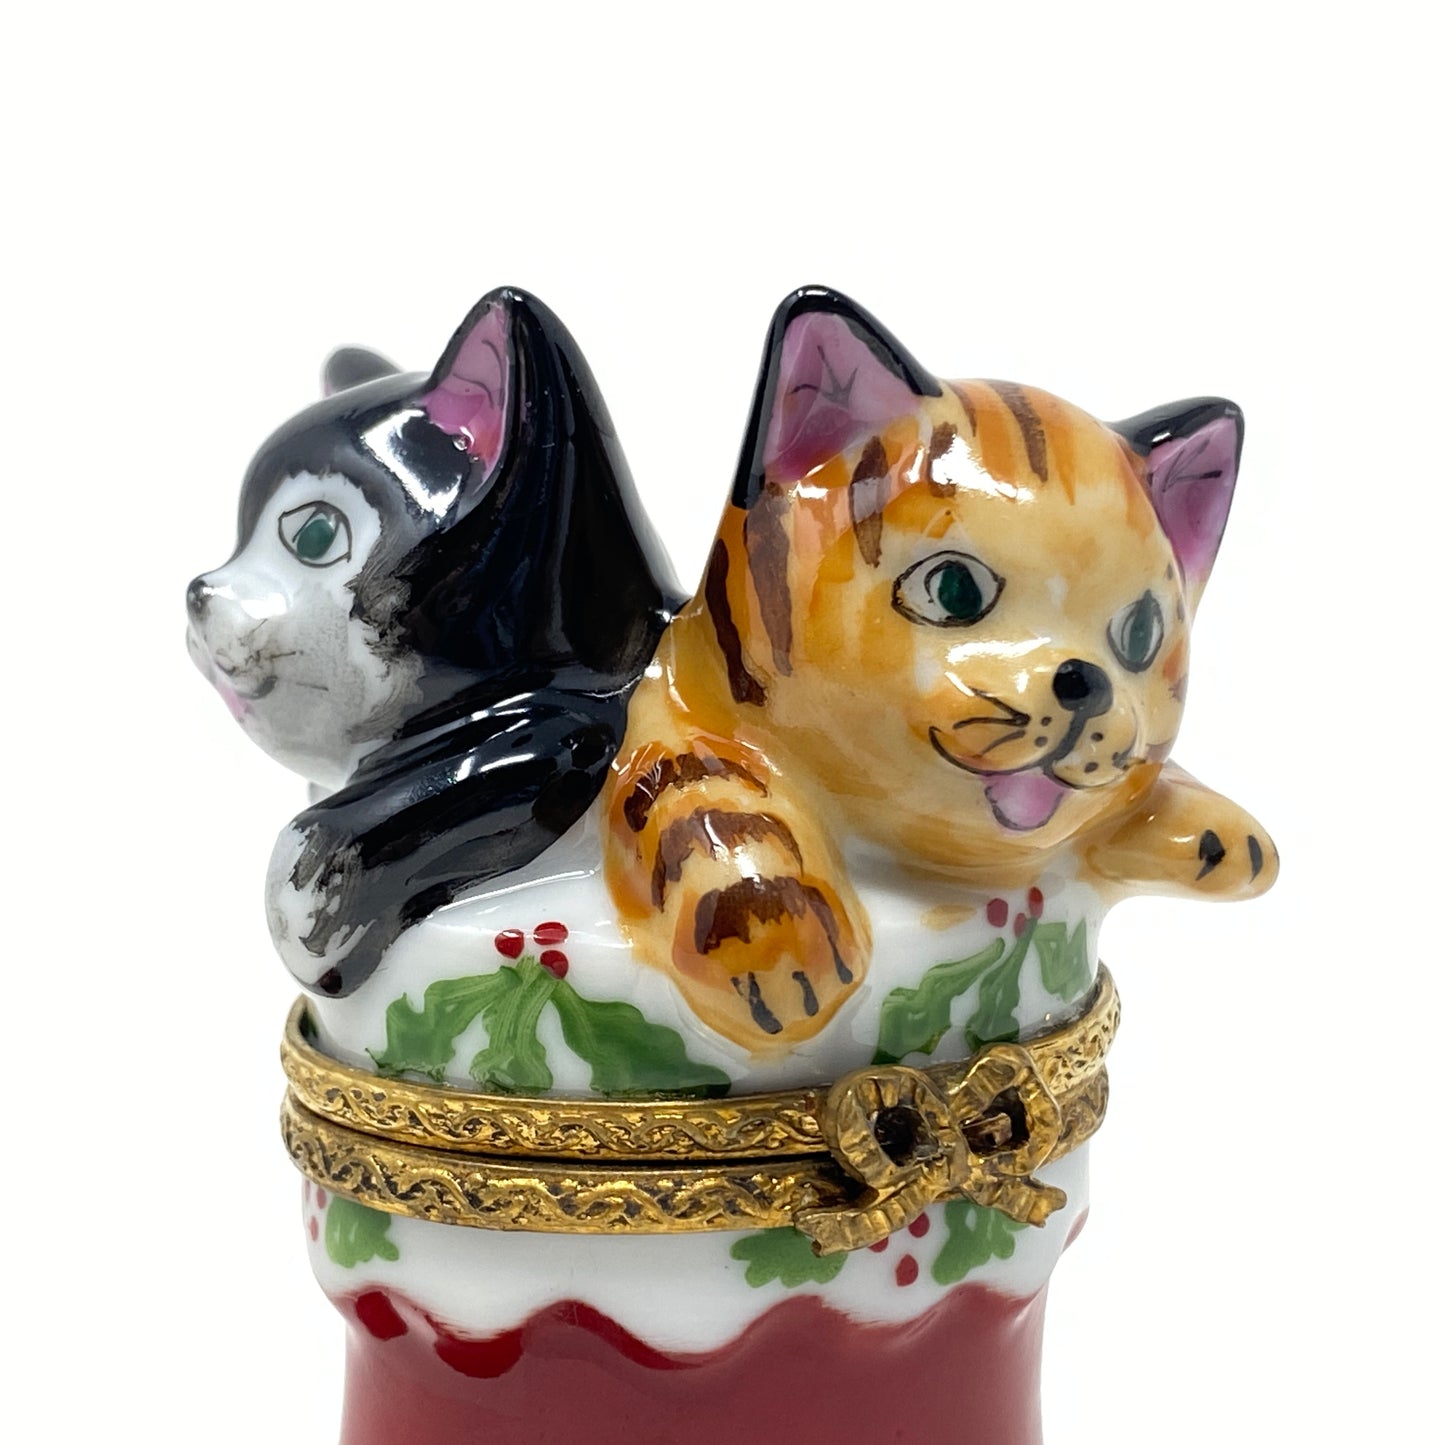 Authentic Limoges France Kittens in a Stocking Christmas Box